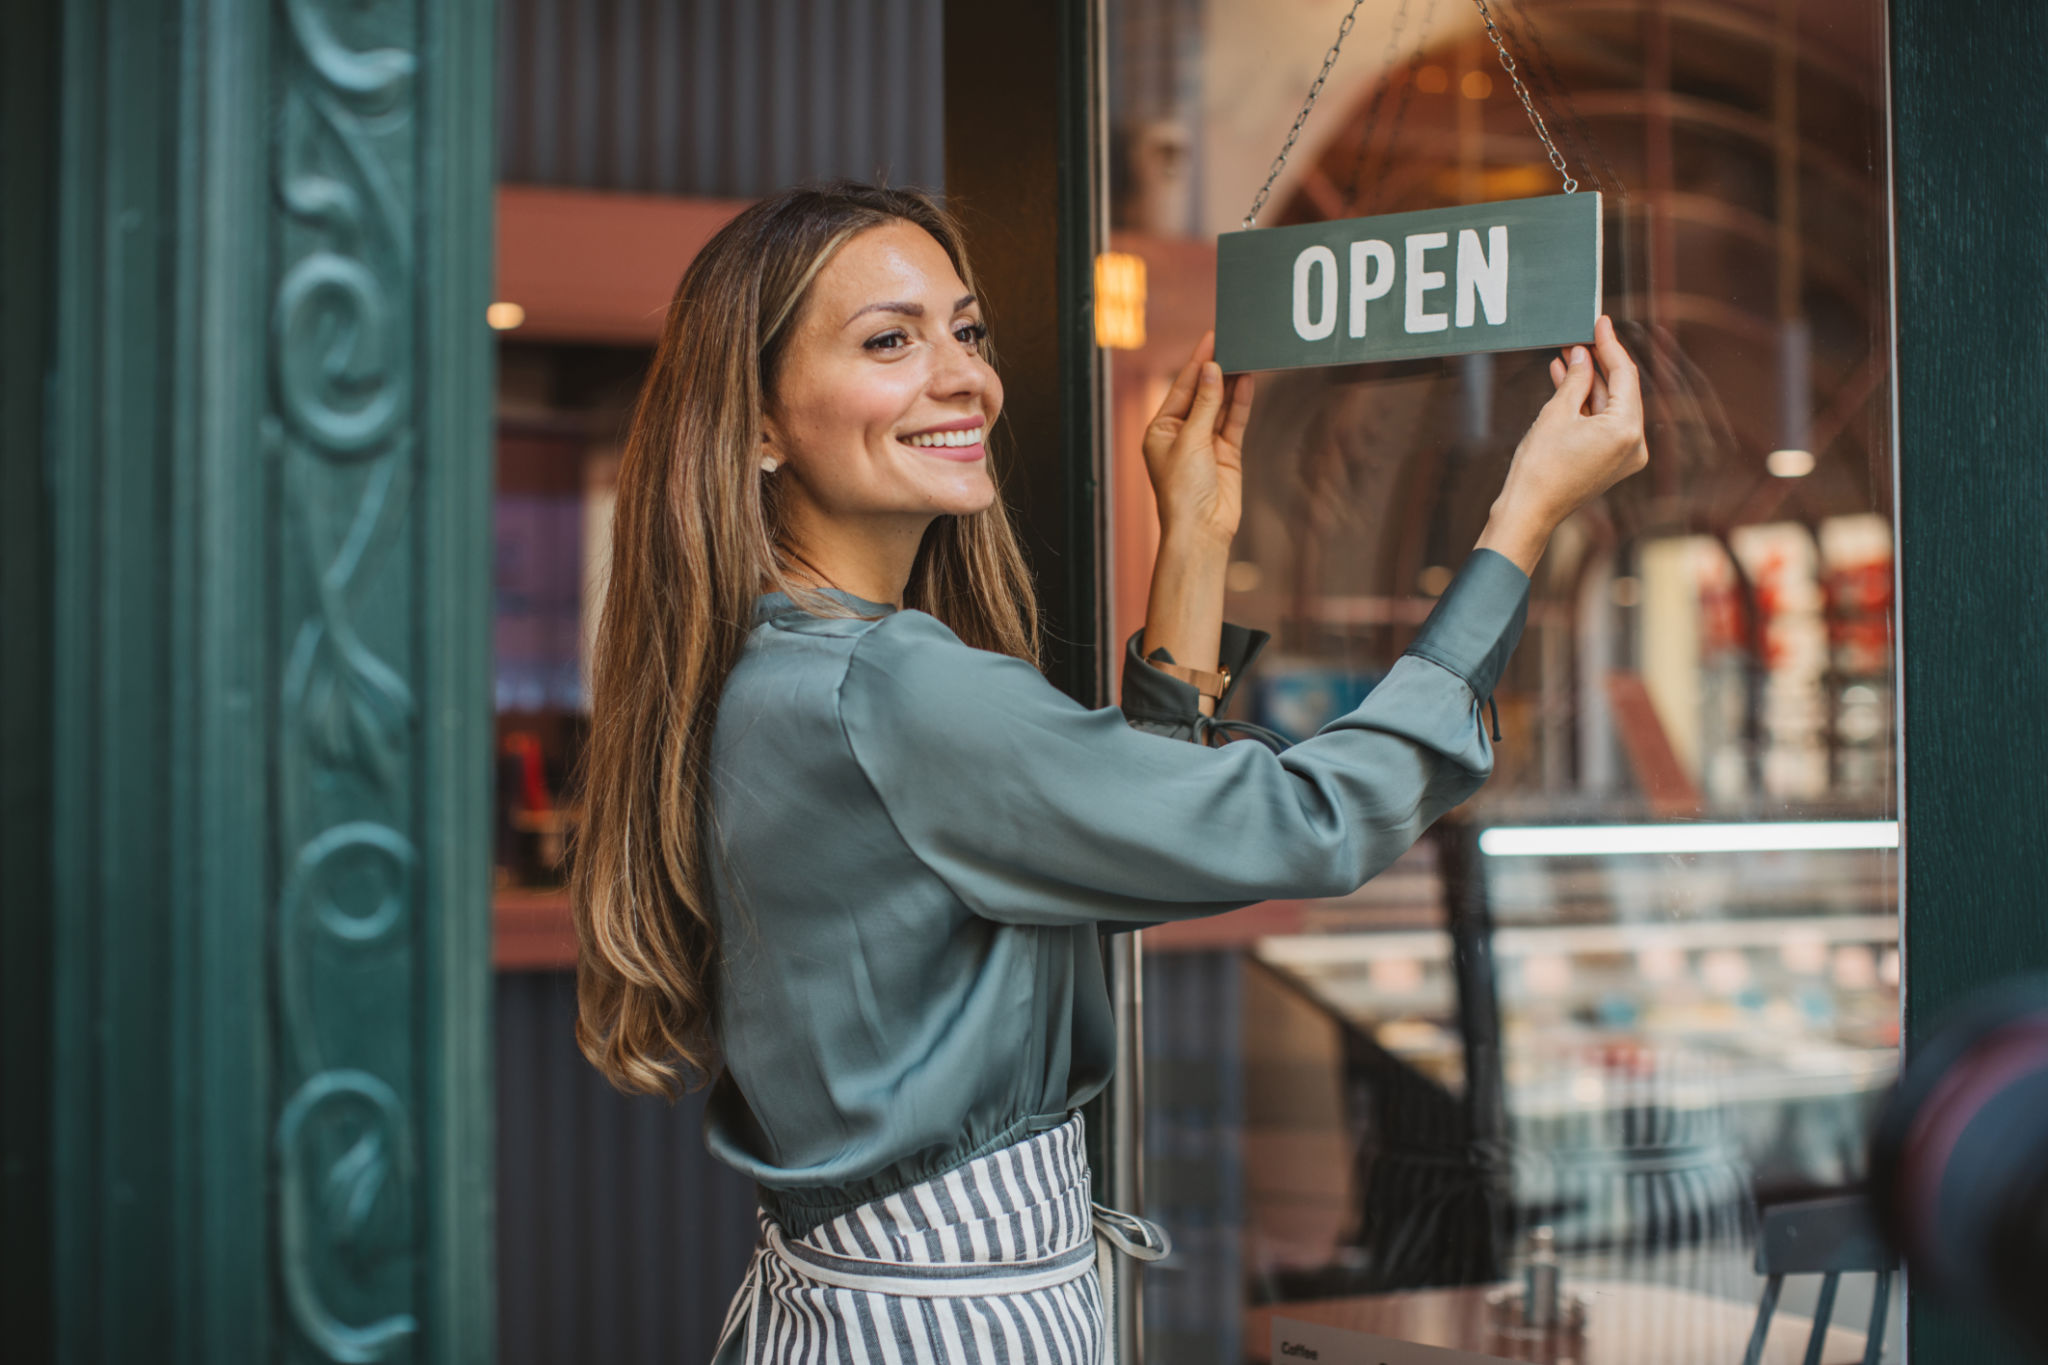 Franchising Path | Did You Know Many Women Find Franchise Ownership a Great Fit?